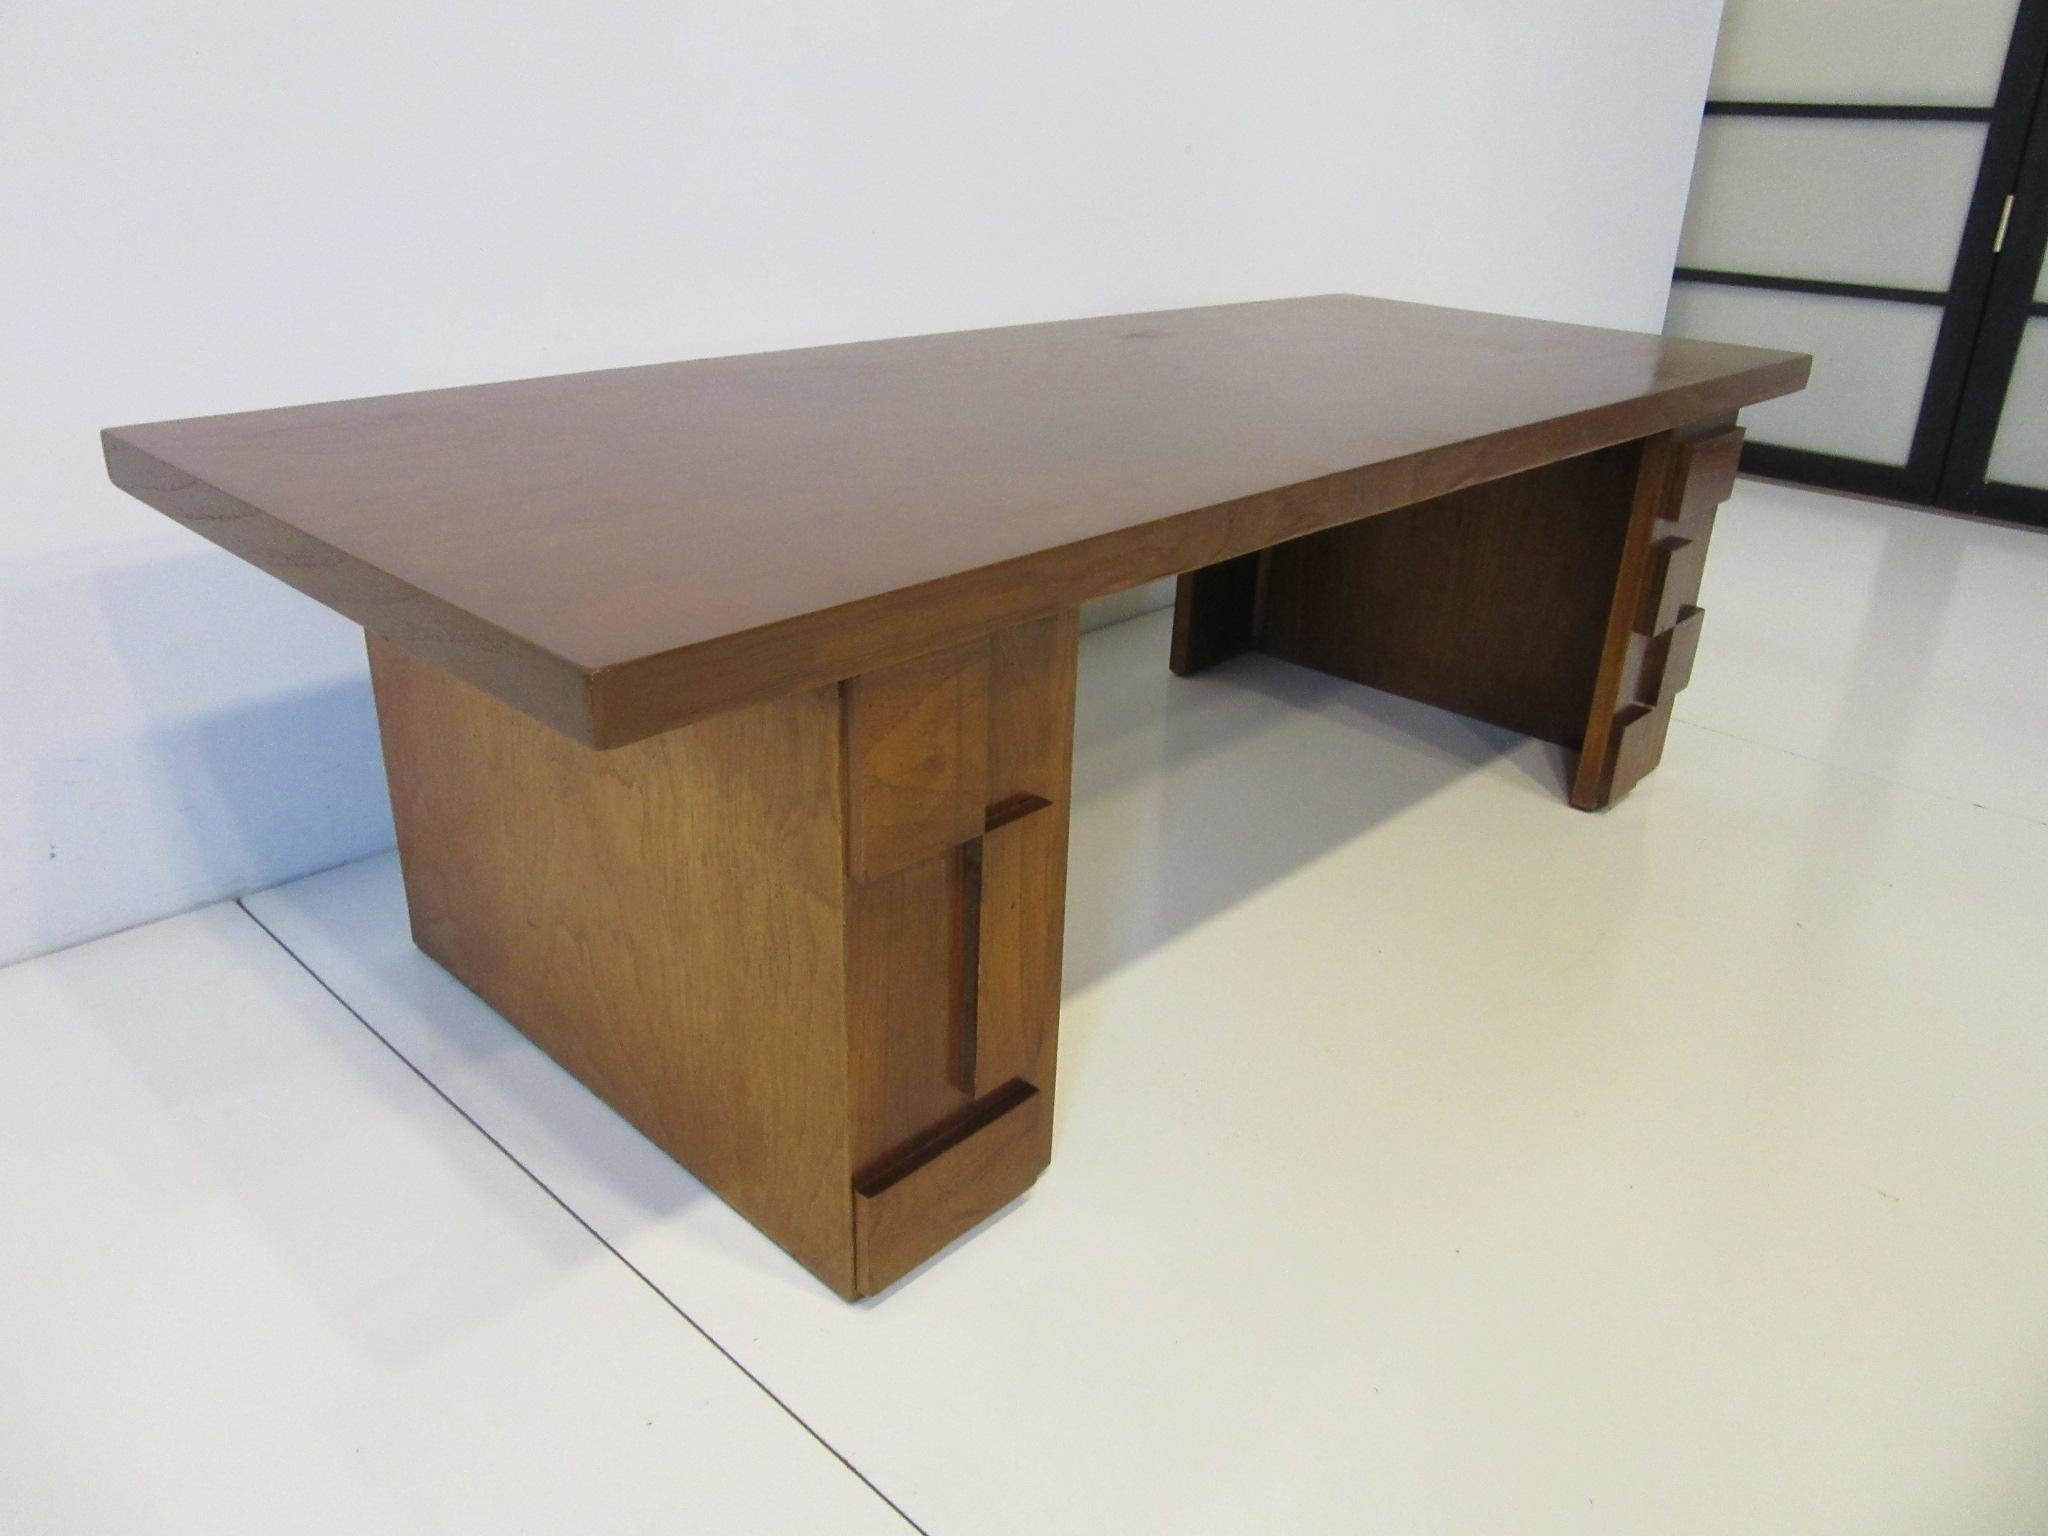 A dark walnut toned coffee table in the Brutalist style with applied blocky forms to the legs heavy graining to the top and a contrasting wood grain boarder trim. Manufactured by the Lane Furniture Company Lane Altavista.